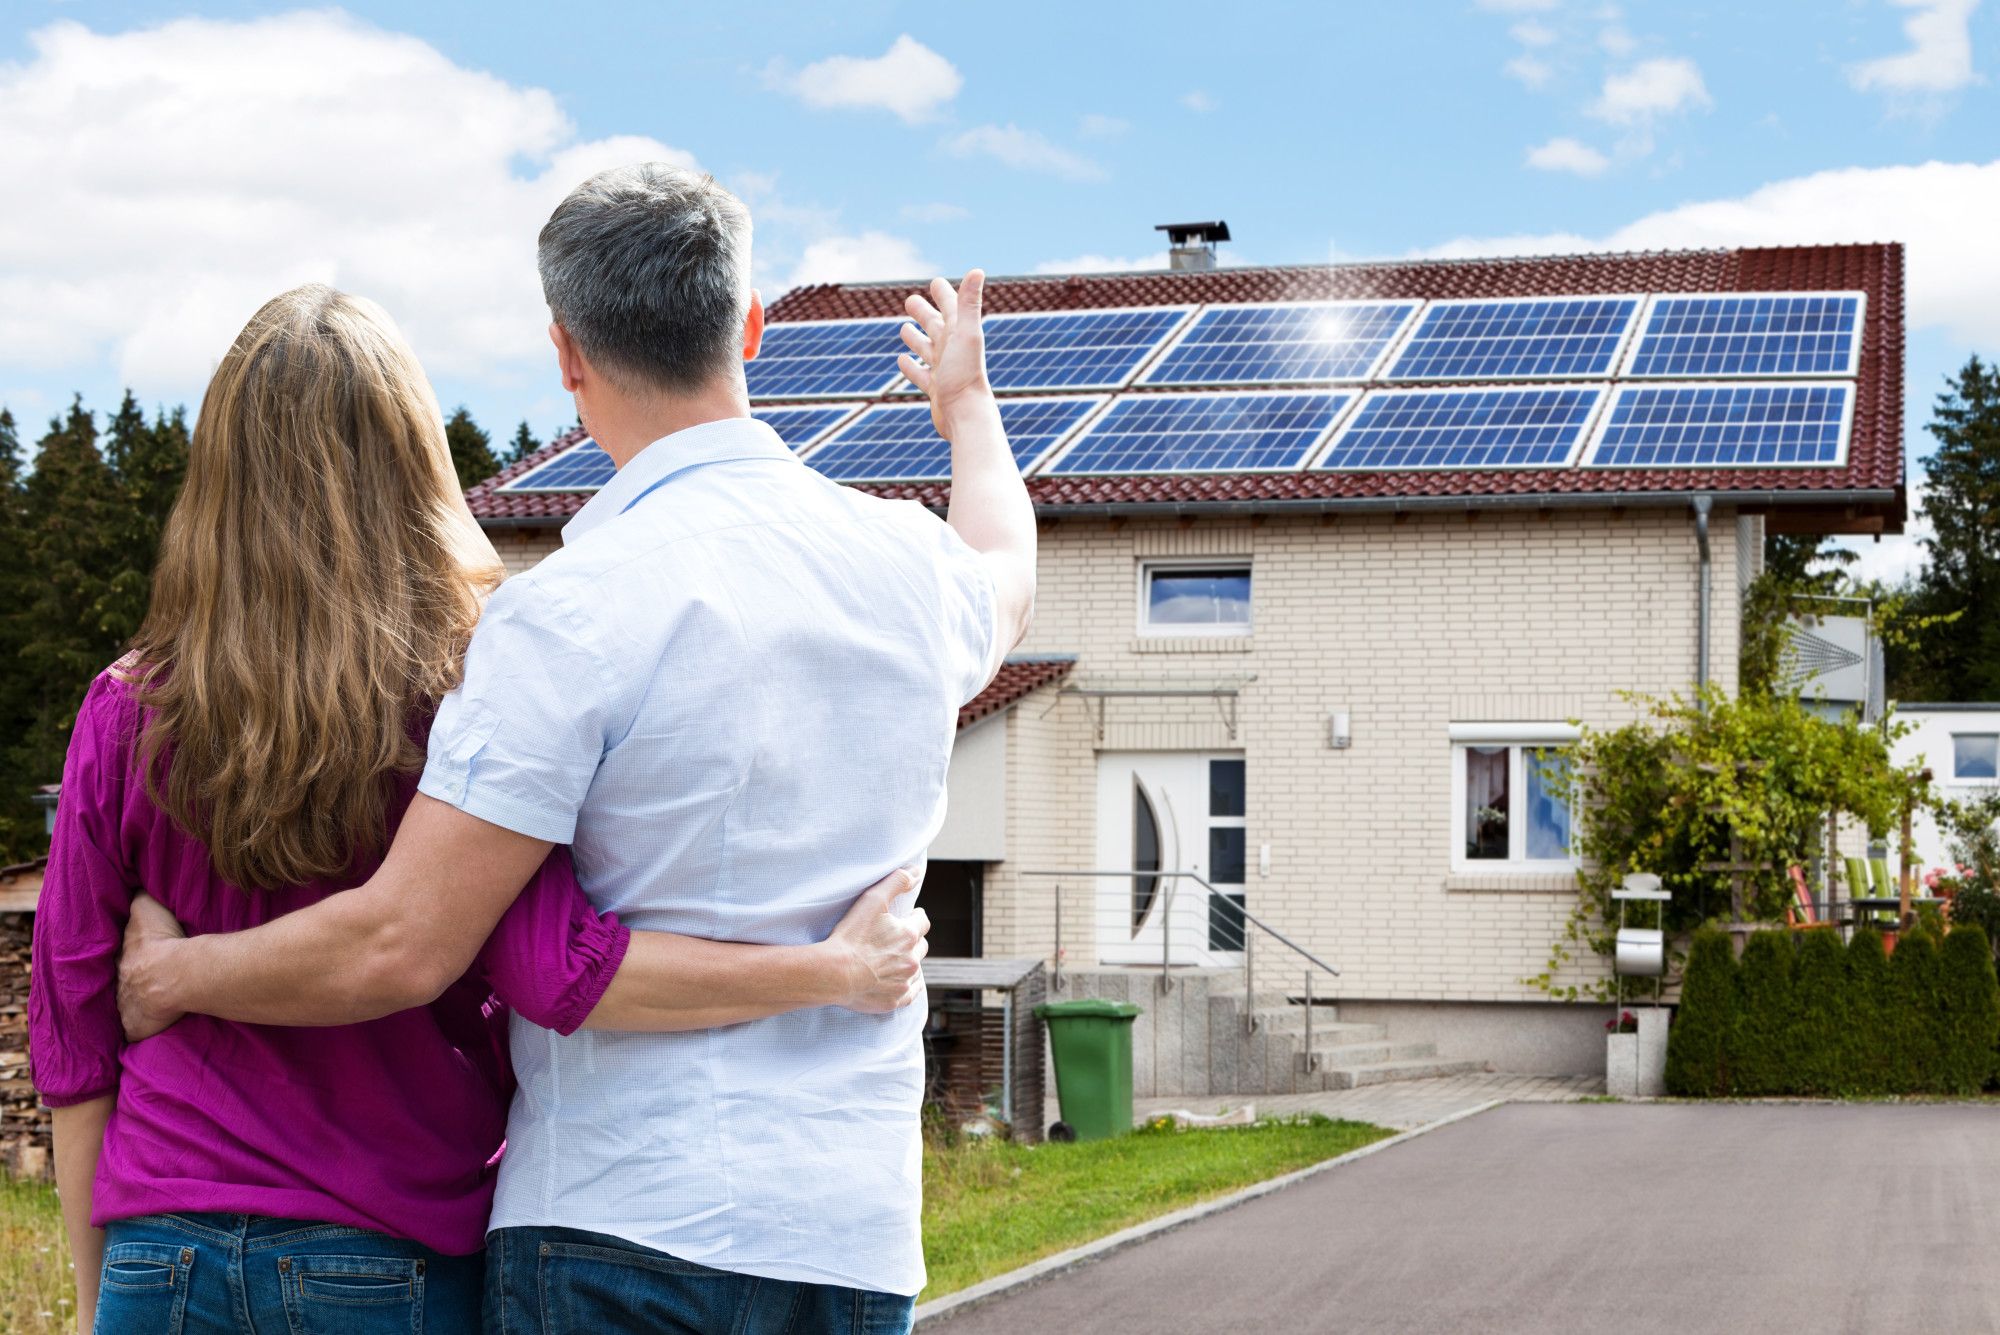 Solar ROI: What Return on Investment Can You Expect From Solar Panels?